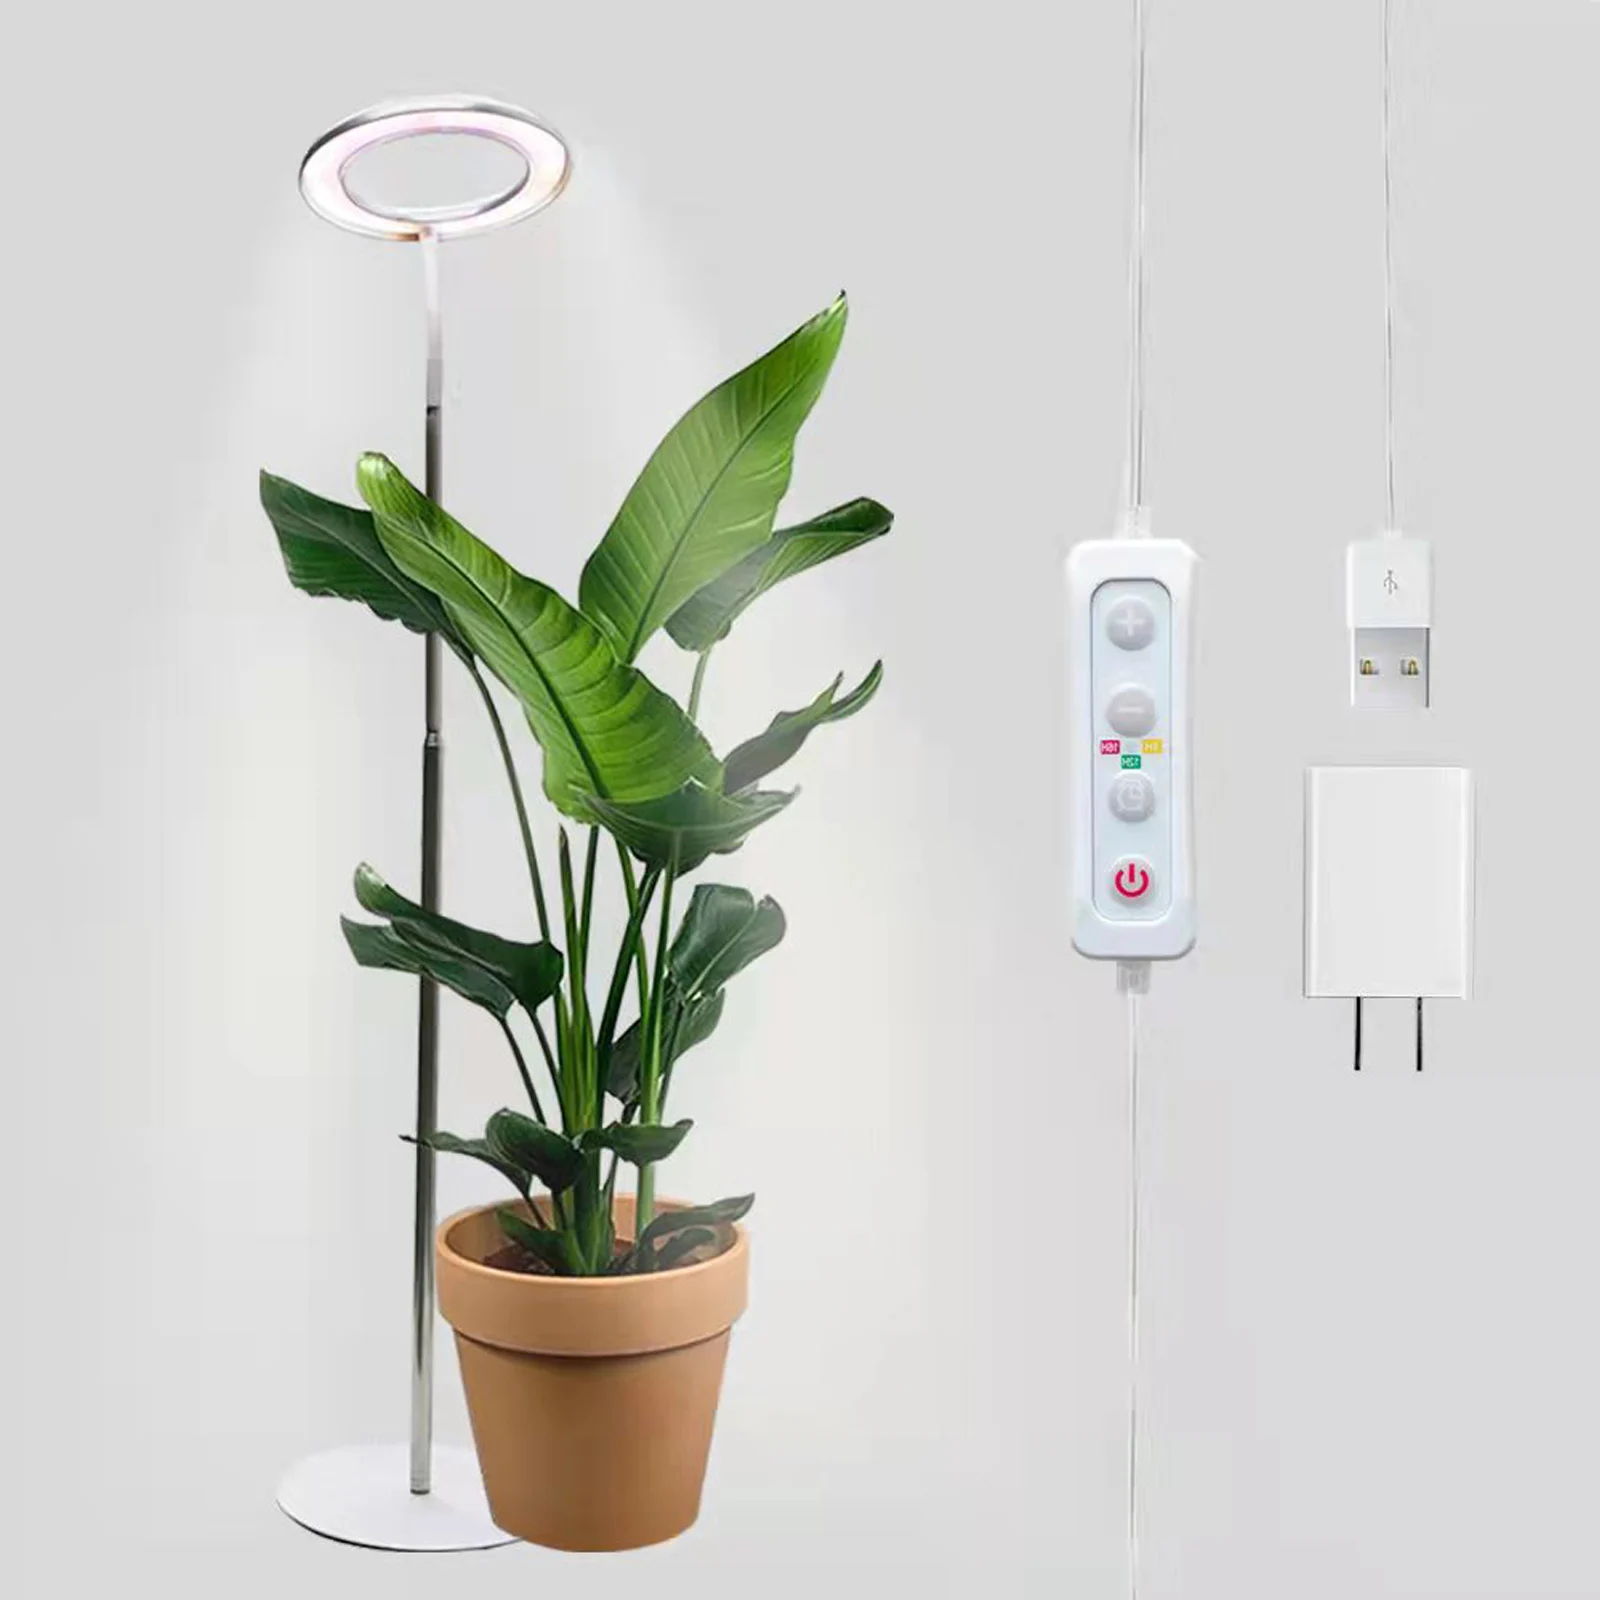 Dimmable With Timer Function Color Switchable